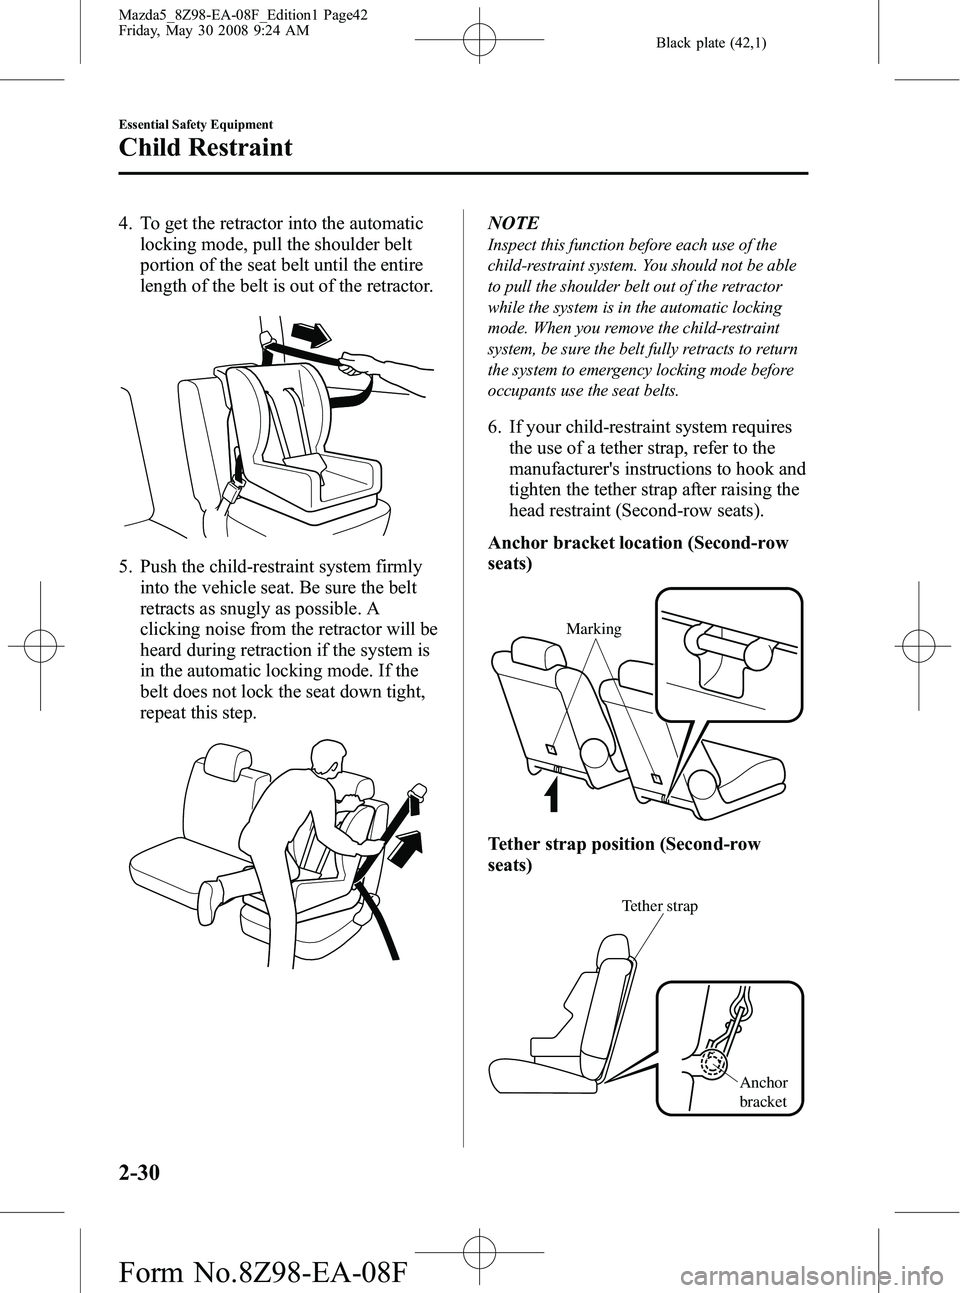 MAZDA MODEL 5 2009 Service Manual Black plate (42,1)
4. To get the retractor into the automaticlocking mode, pull the shoulder belt
portion of the seat belt until the entire
length of the belt is out of the retractor.
5. Push the chil